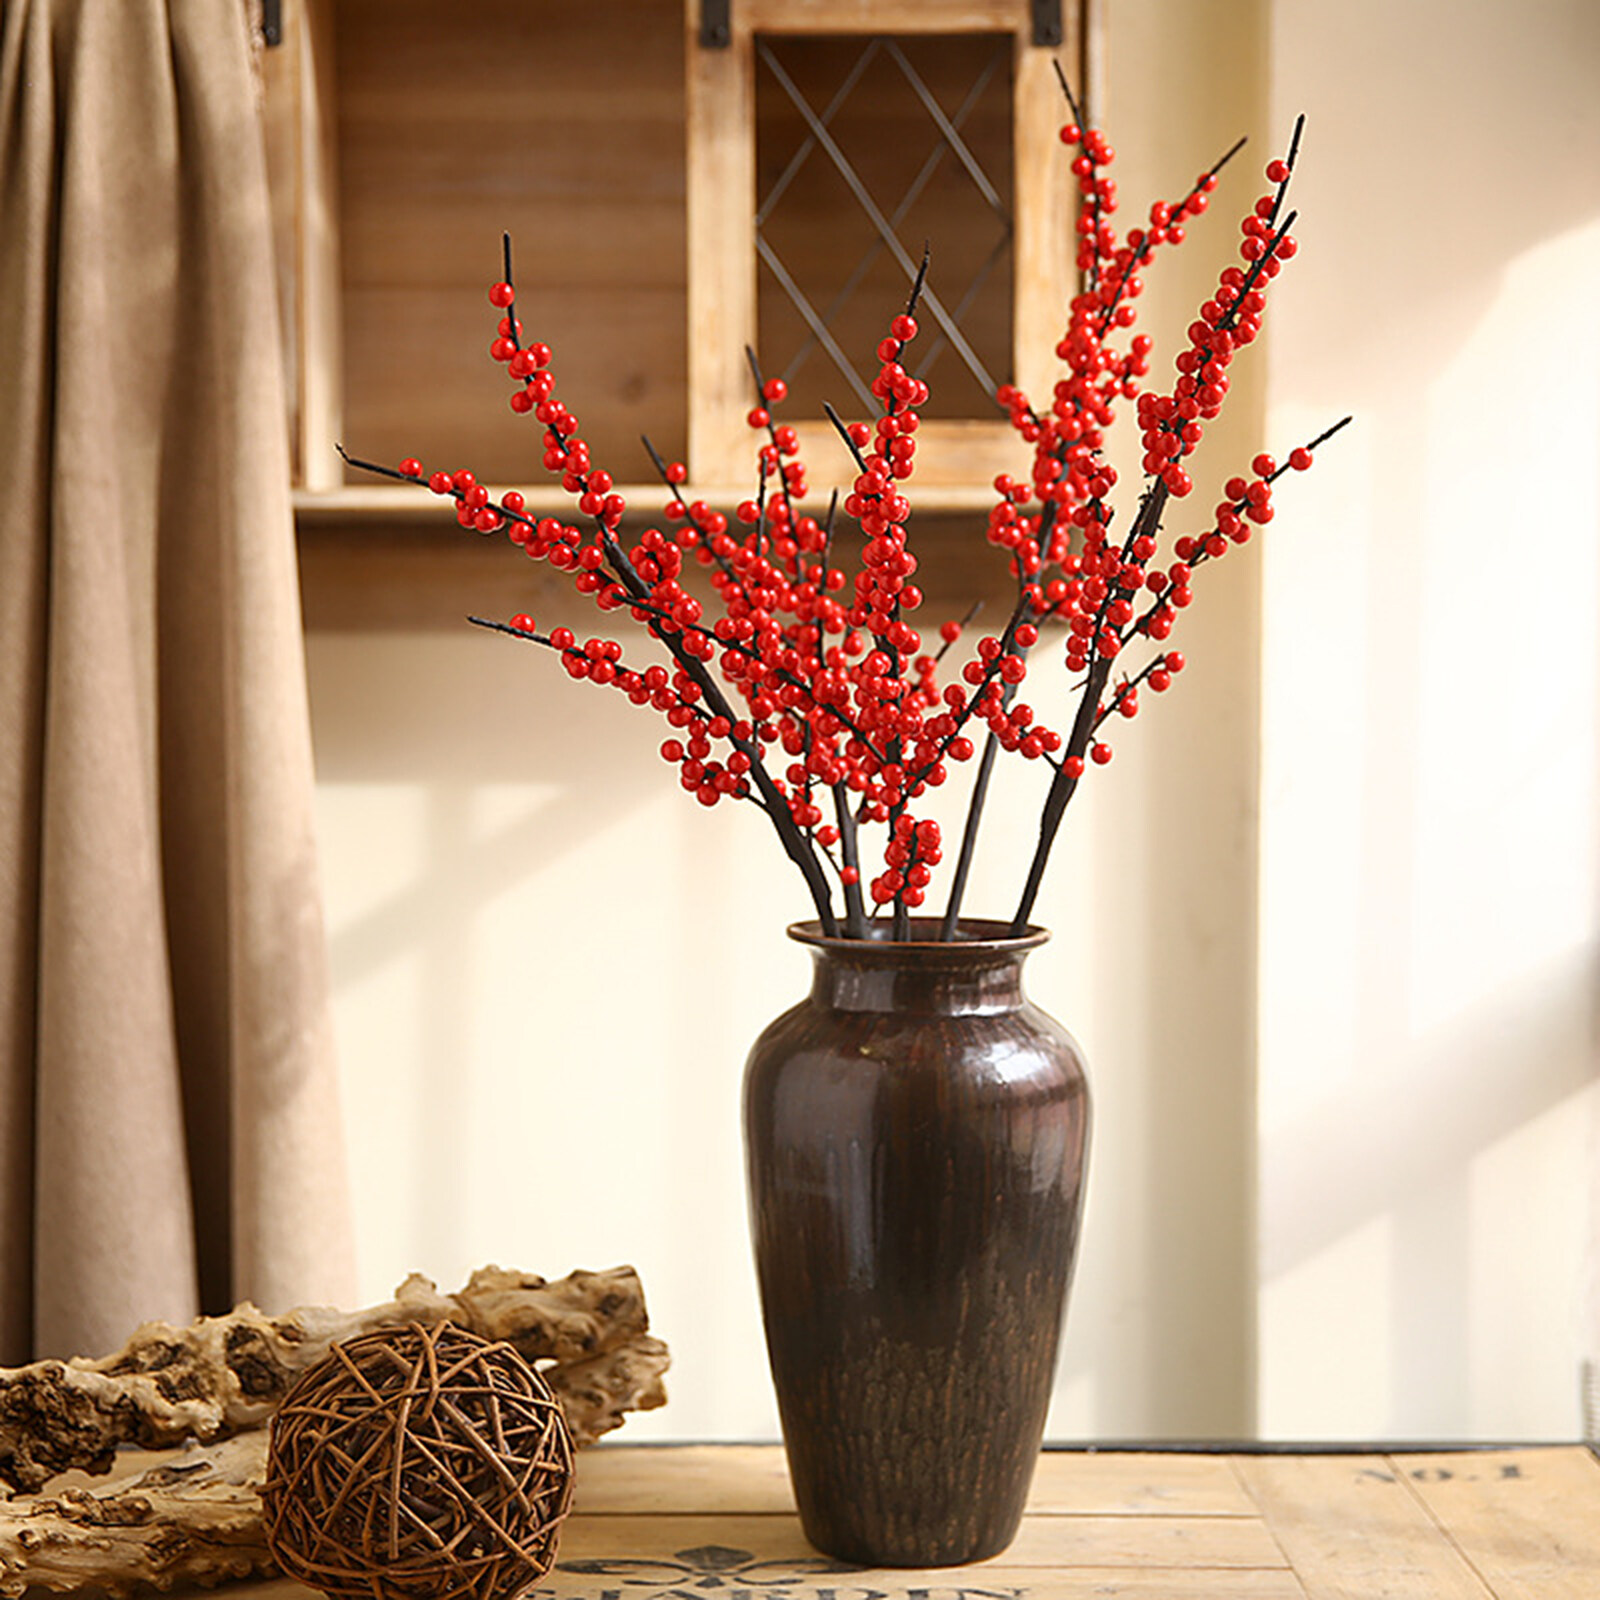 Ready Stock 1pcs 81cm Stems Holly Berry Dried Flowers Red Berries Christmas Red Berry Fruit Branches Decor Flower Arrangement Accessories Home Xmas Simulation Plants Flowers Lazada